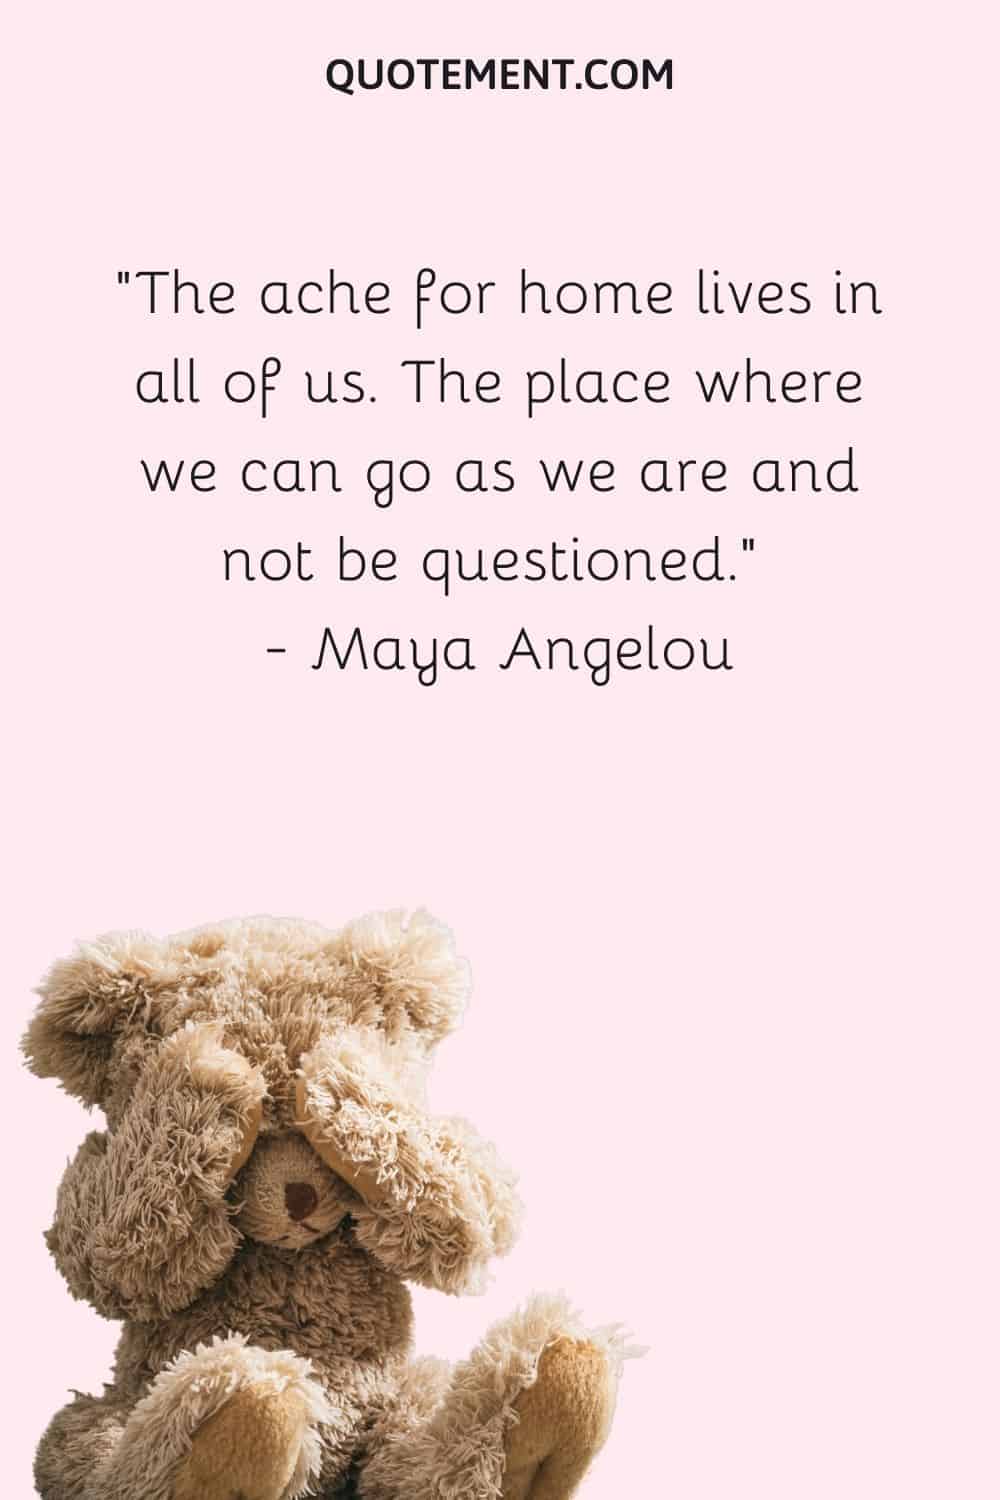 The ache for home lives in all of us. The place where we can go as we are and not be questioned. — Maya Angelou